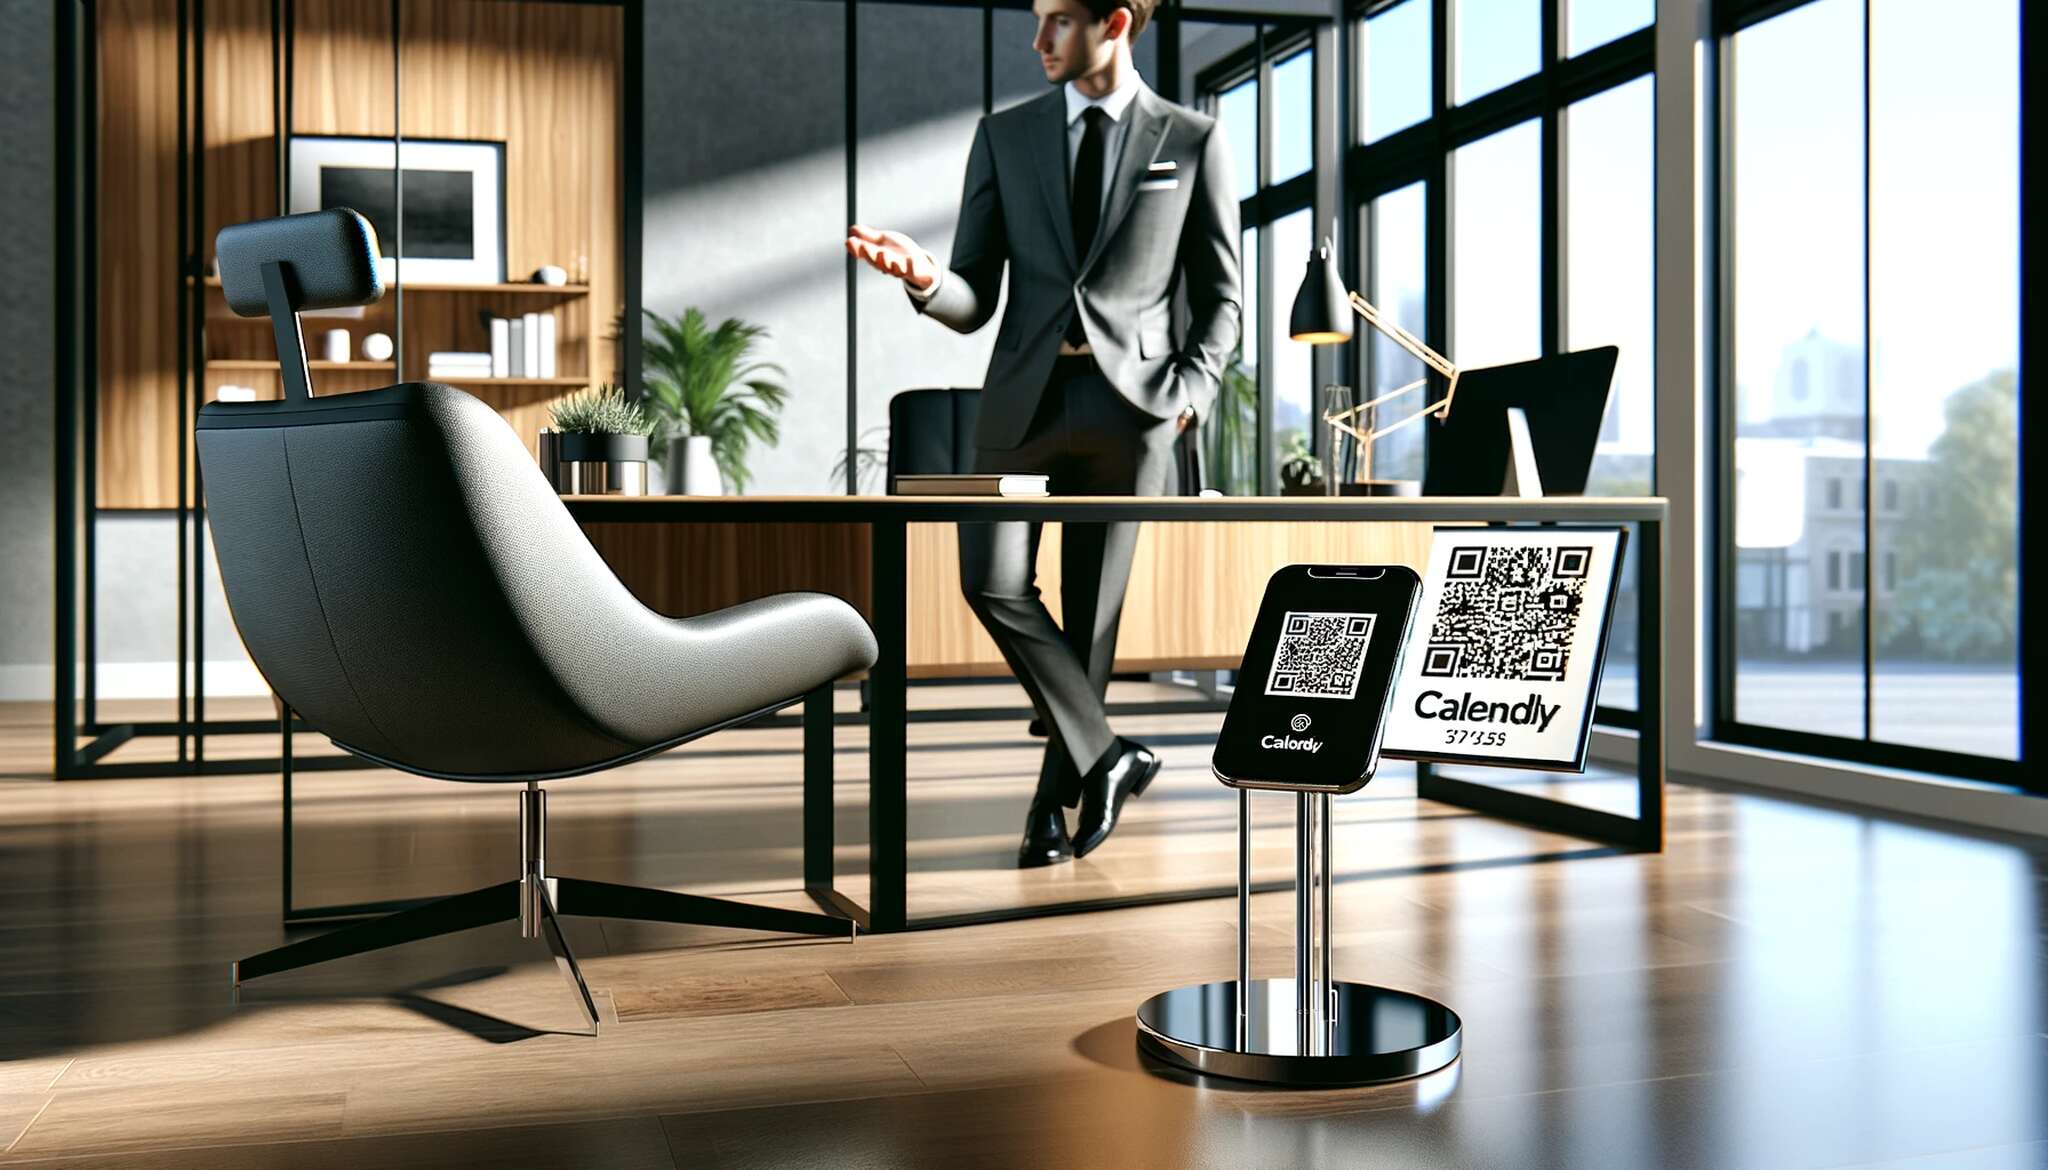 An office space with a man in suit and a Calendly QR code